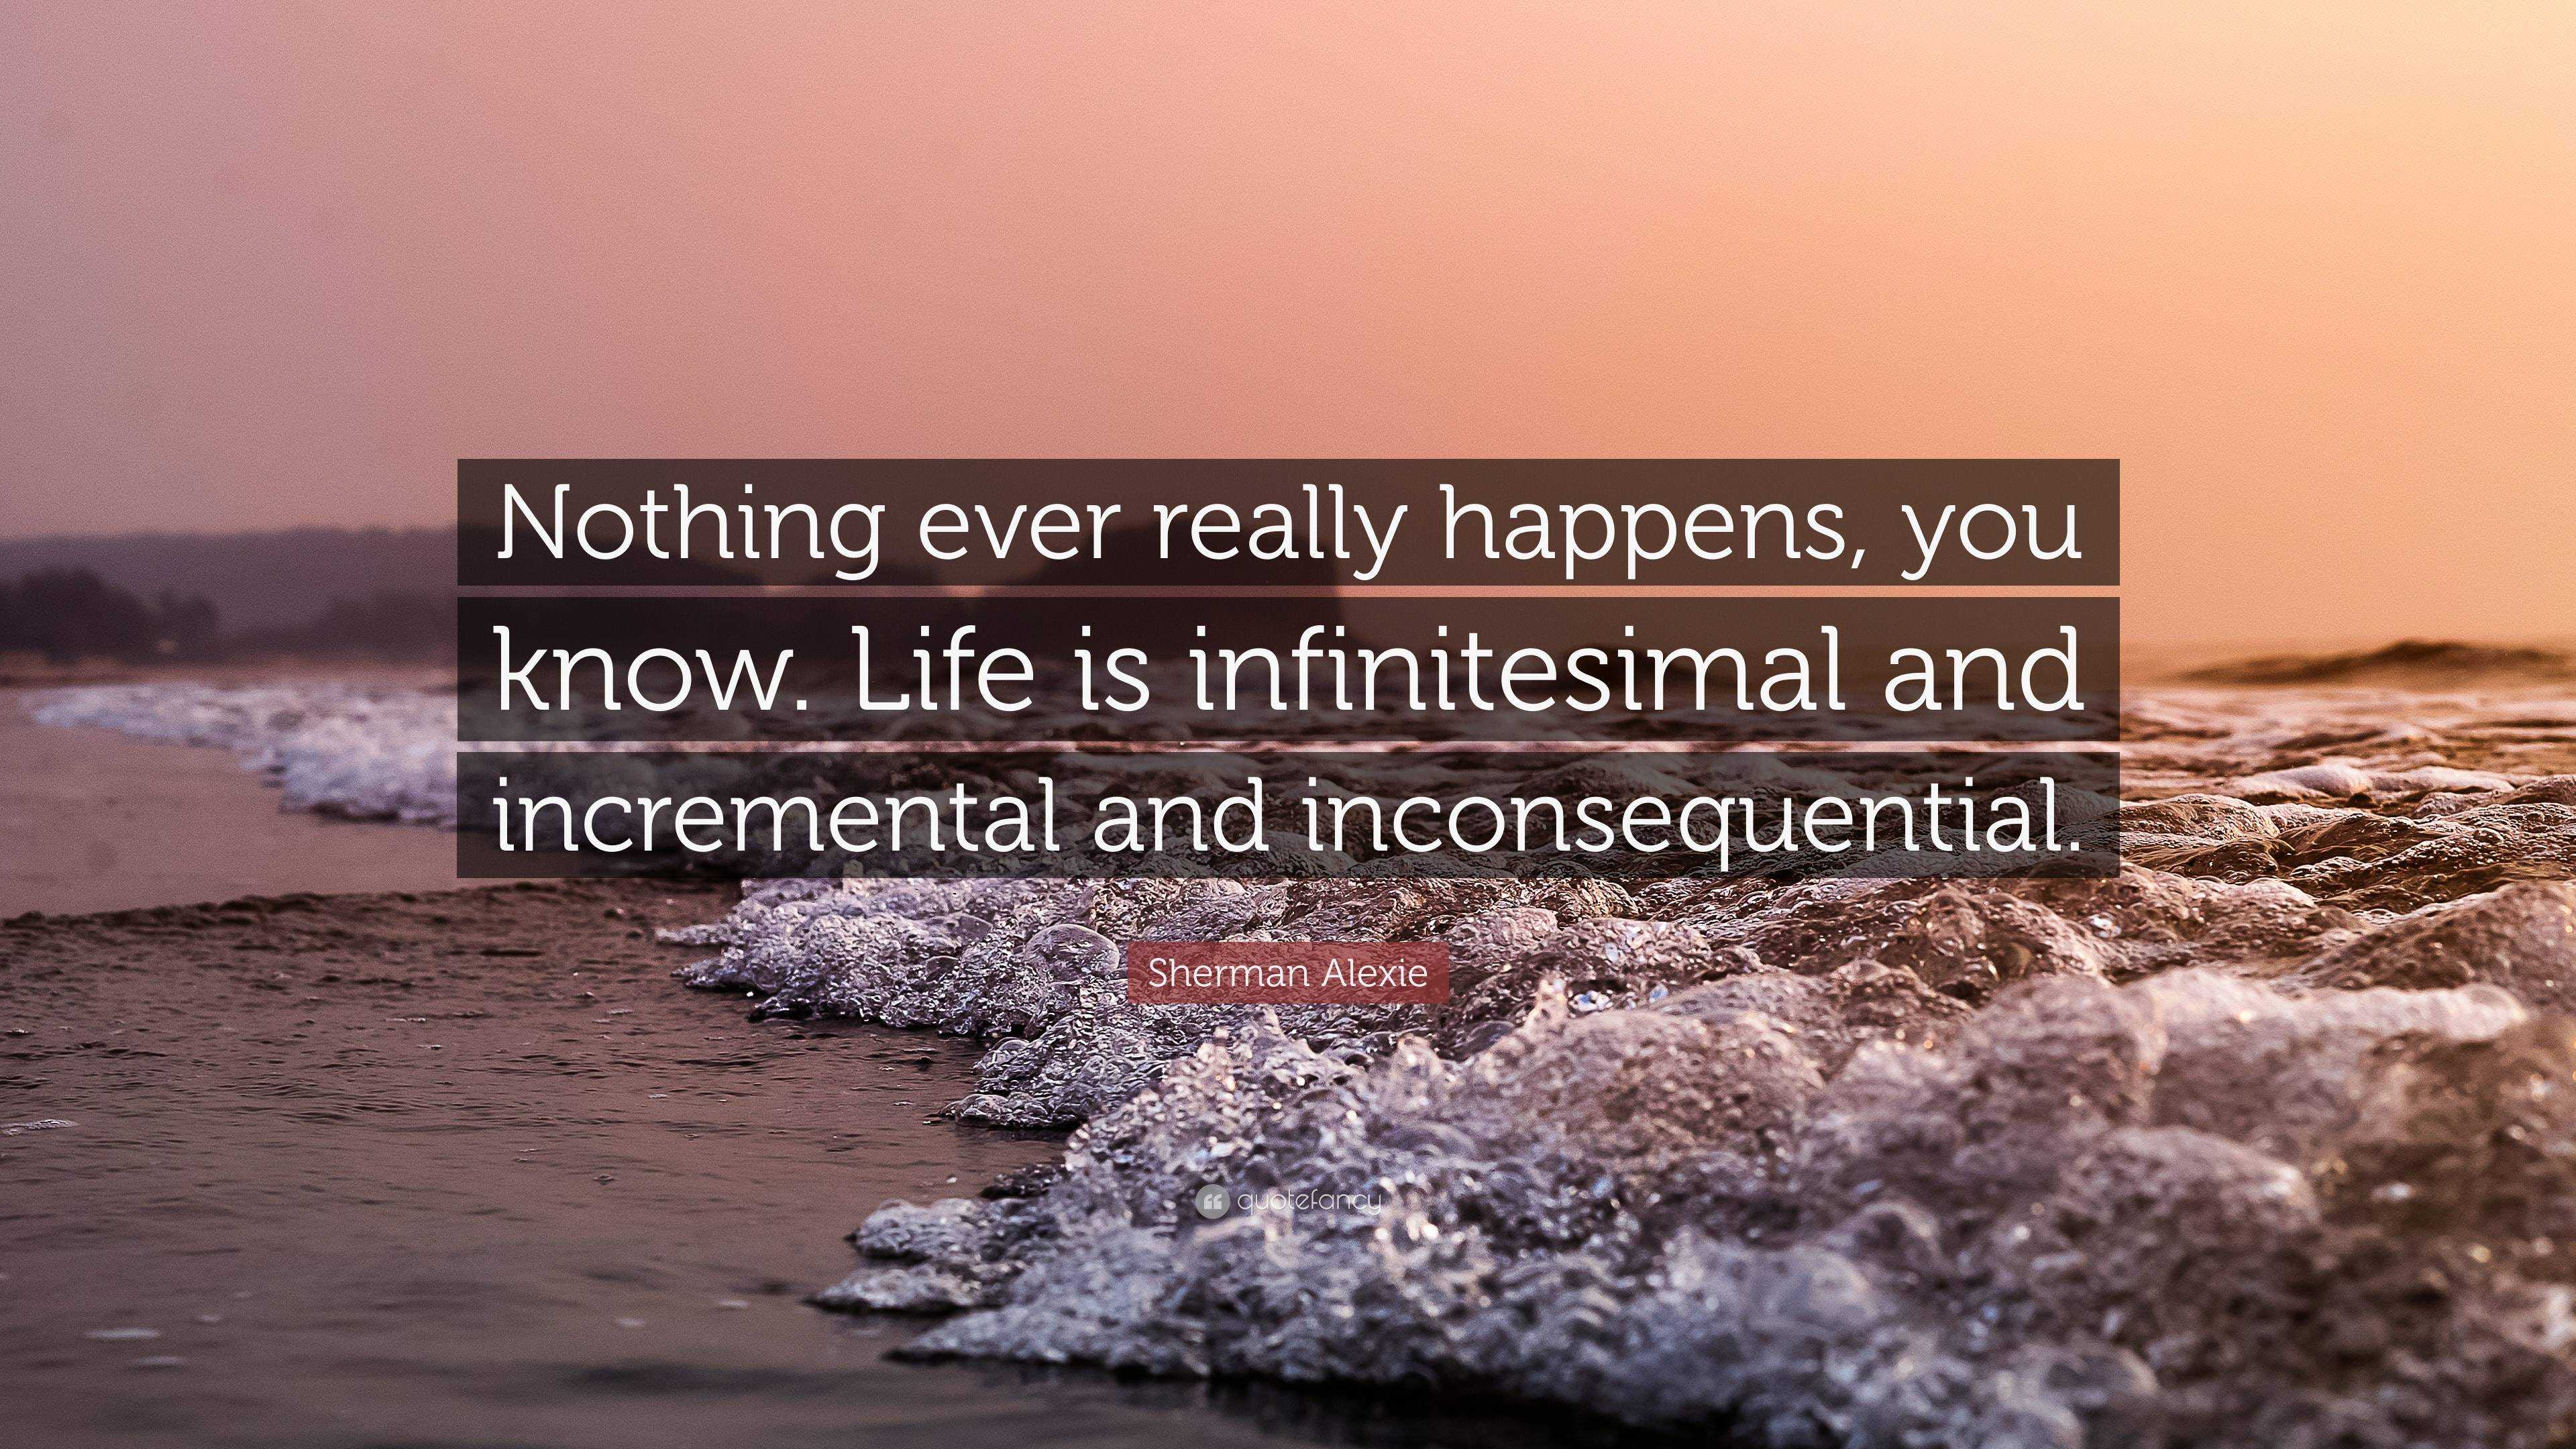 Sherman Alexie Quote: “Nothing ever really happens, you know. Life is ...